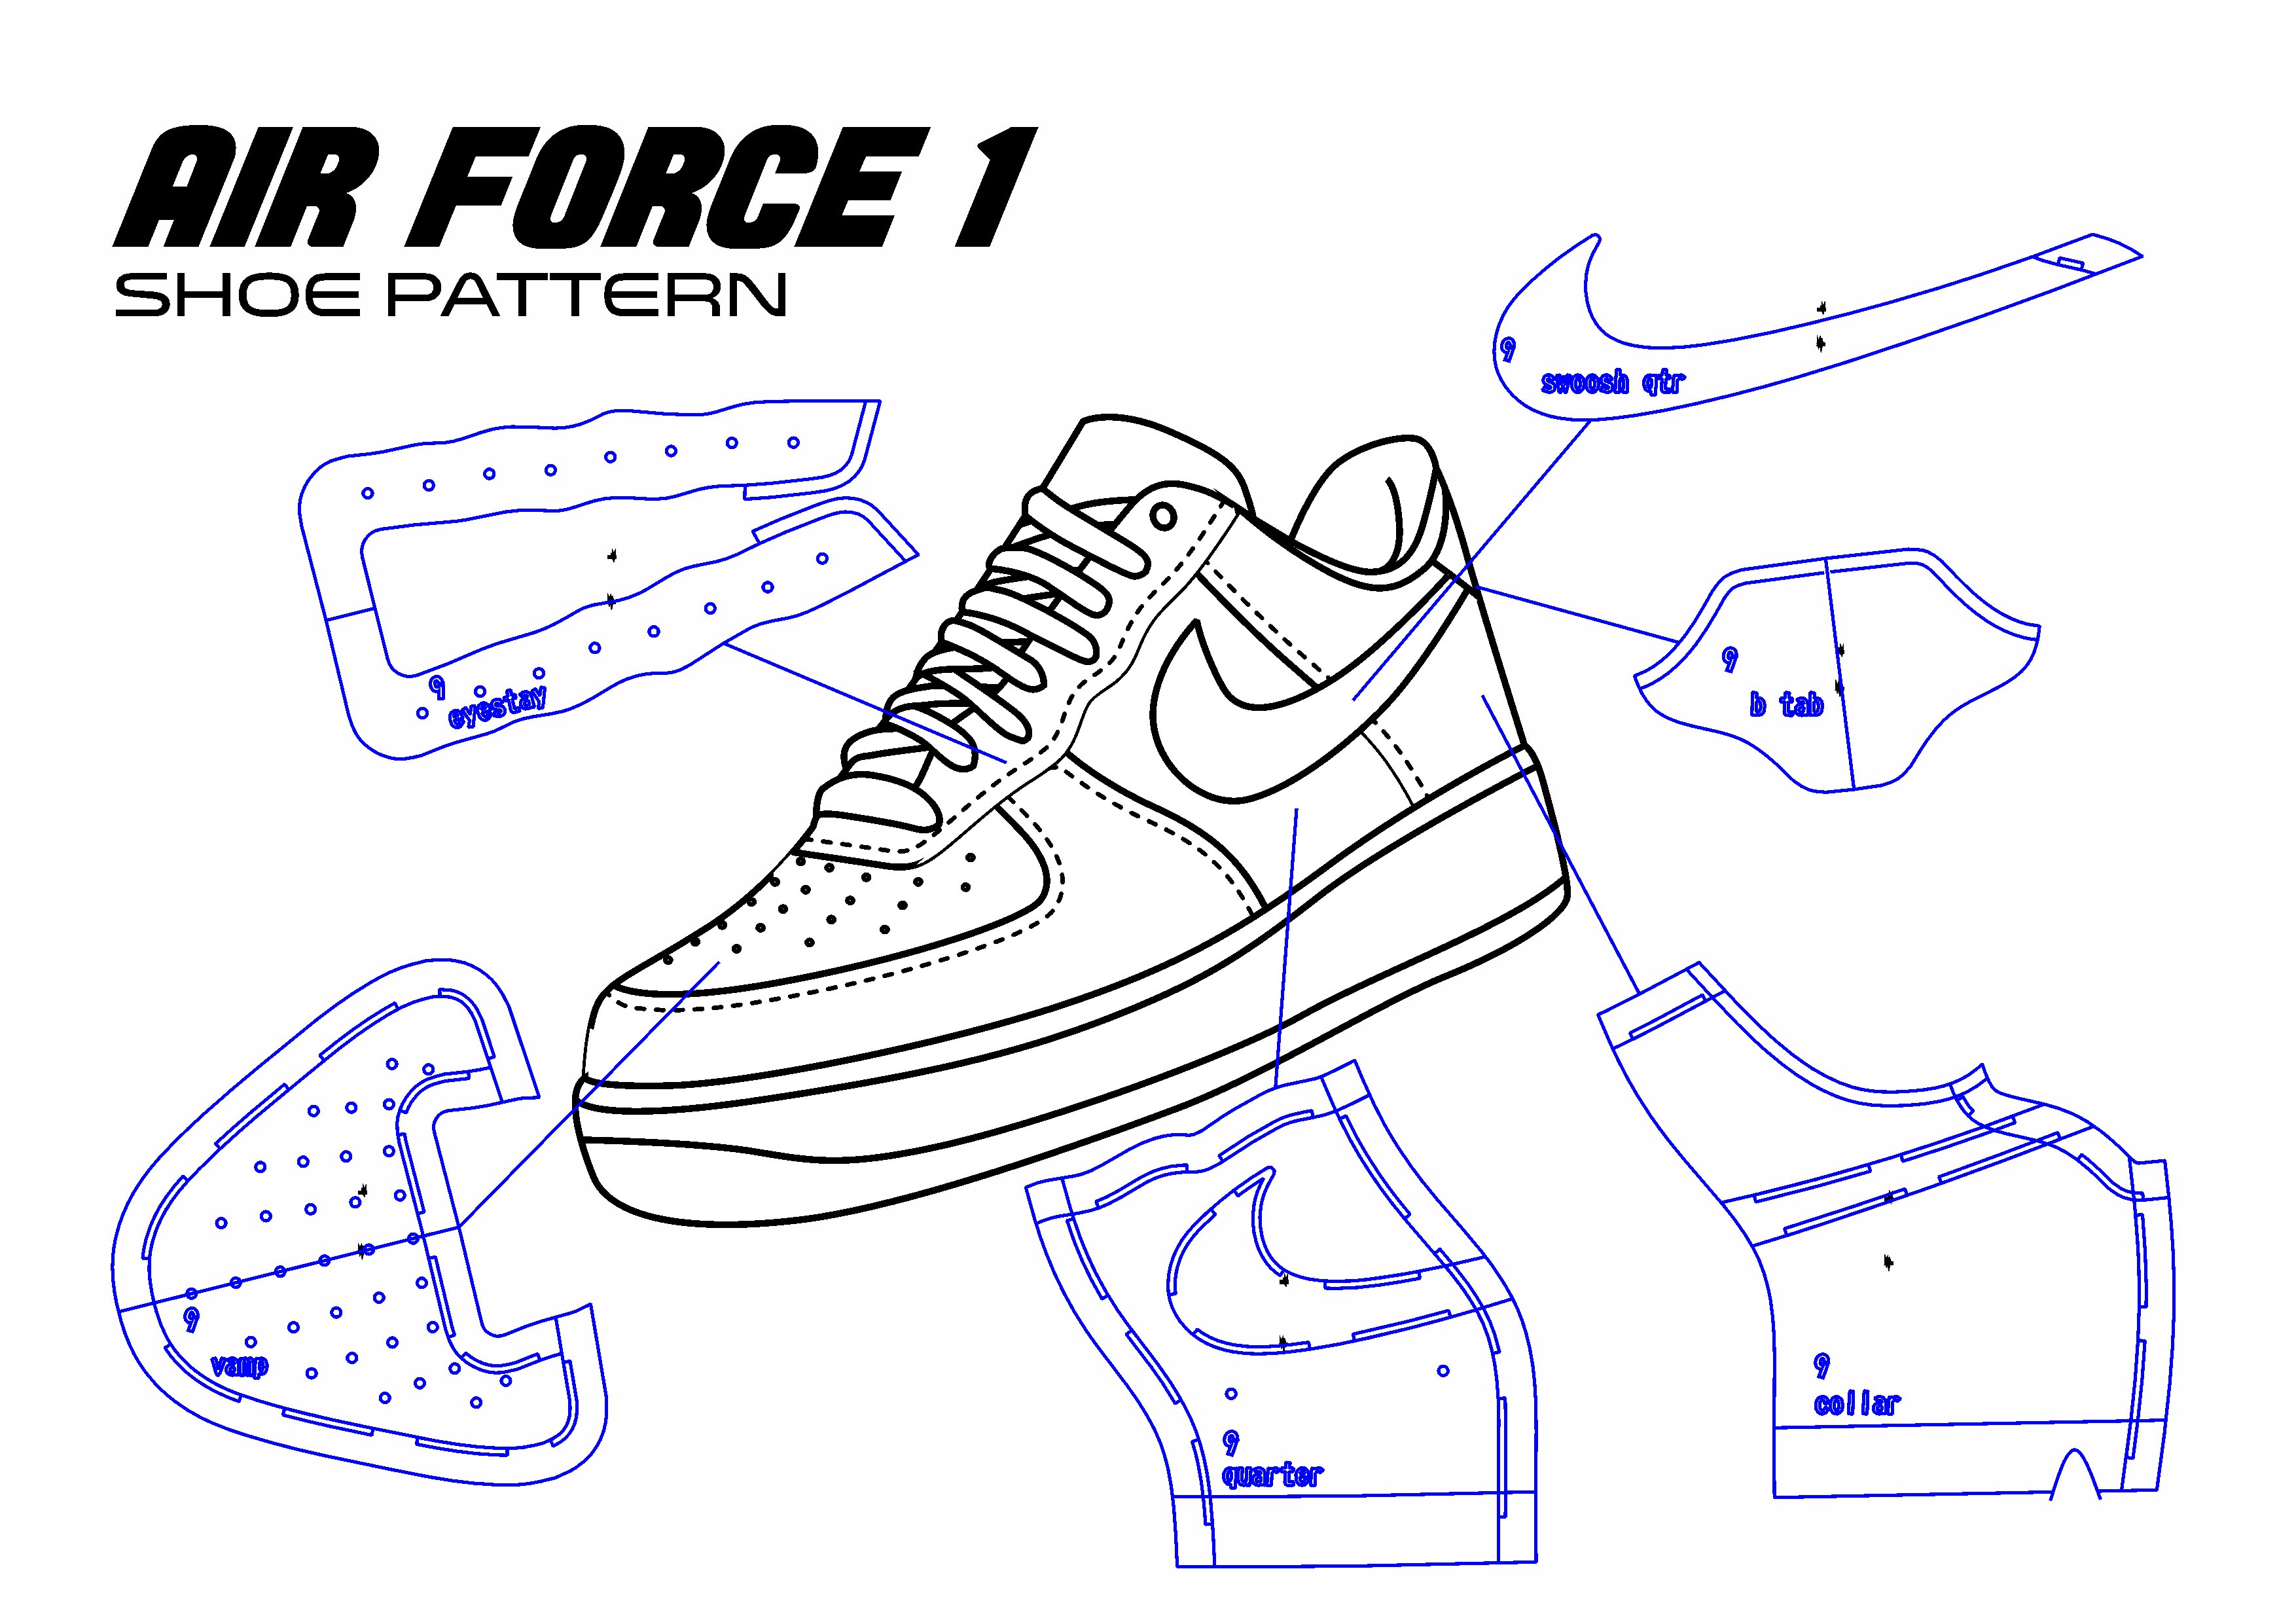 Air Force 1 Shoe Pattern